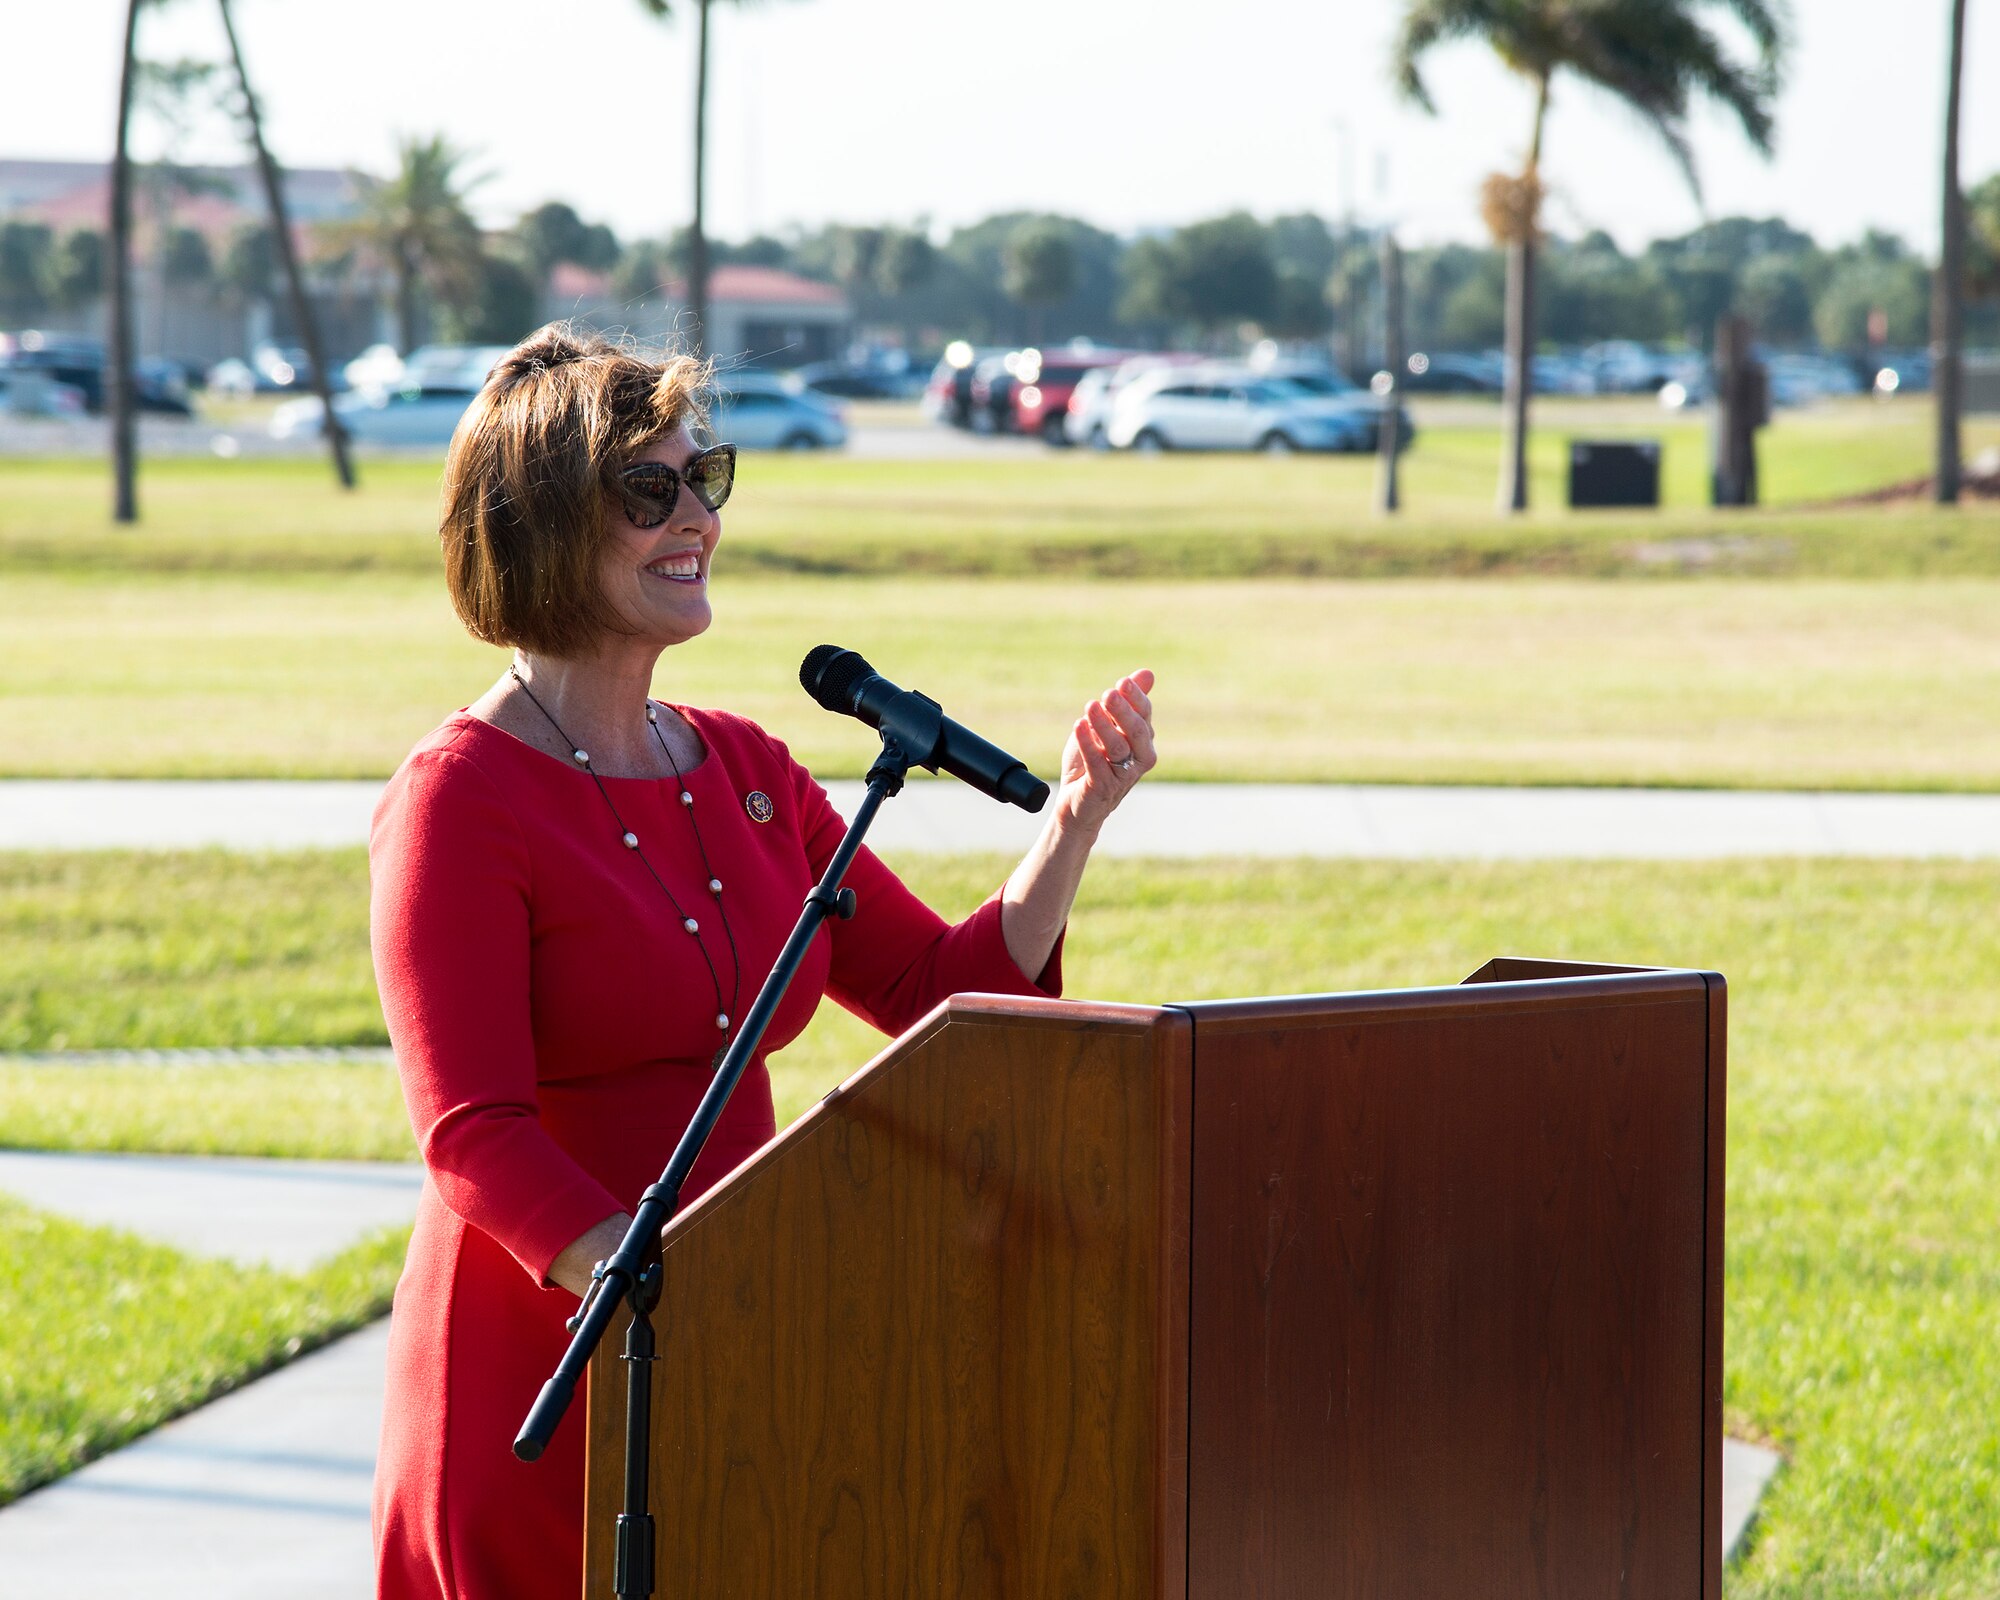 Congresswoman Kathy Castor, Florida’s 14th congressional district representative, speaks at the 6th Air Refueling Wing redesignation ceremony at MacDill Air Force Base, Fla., Sept. 30, 2019.